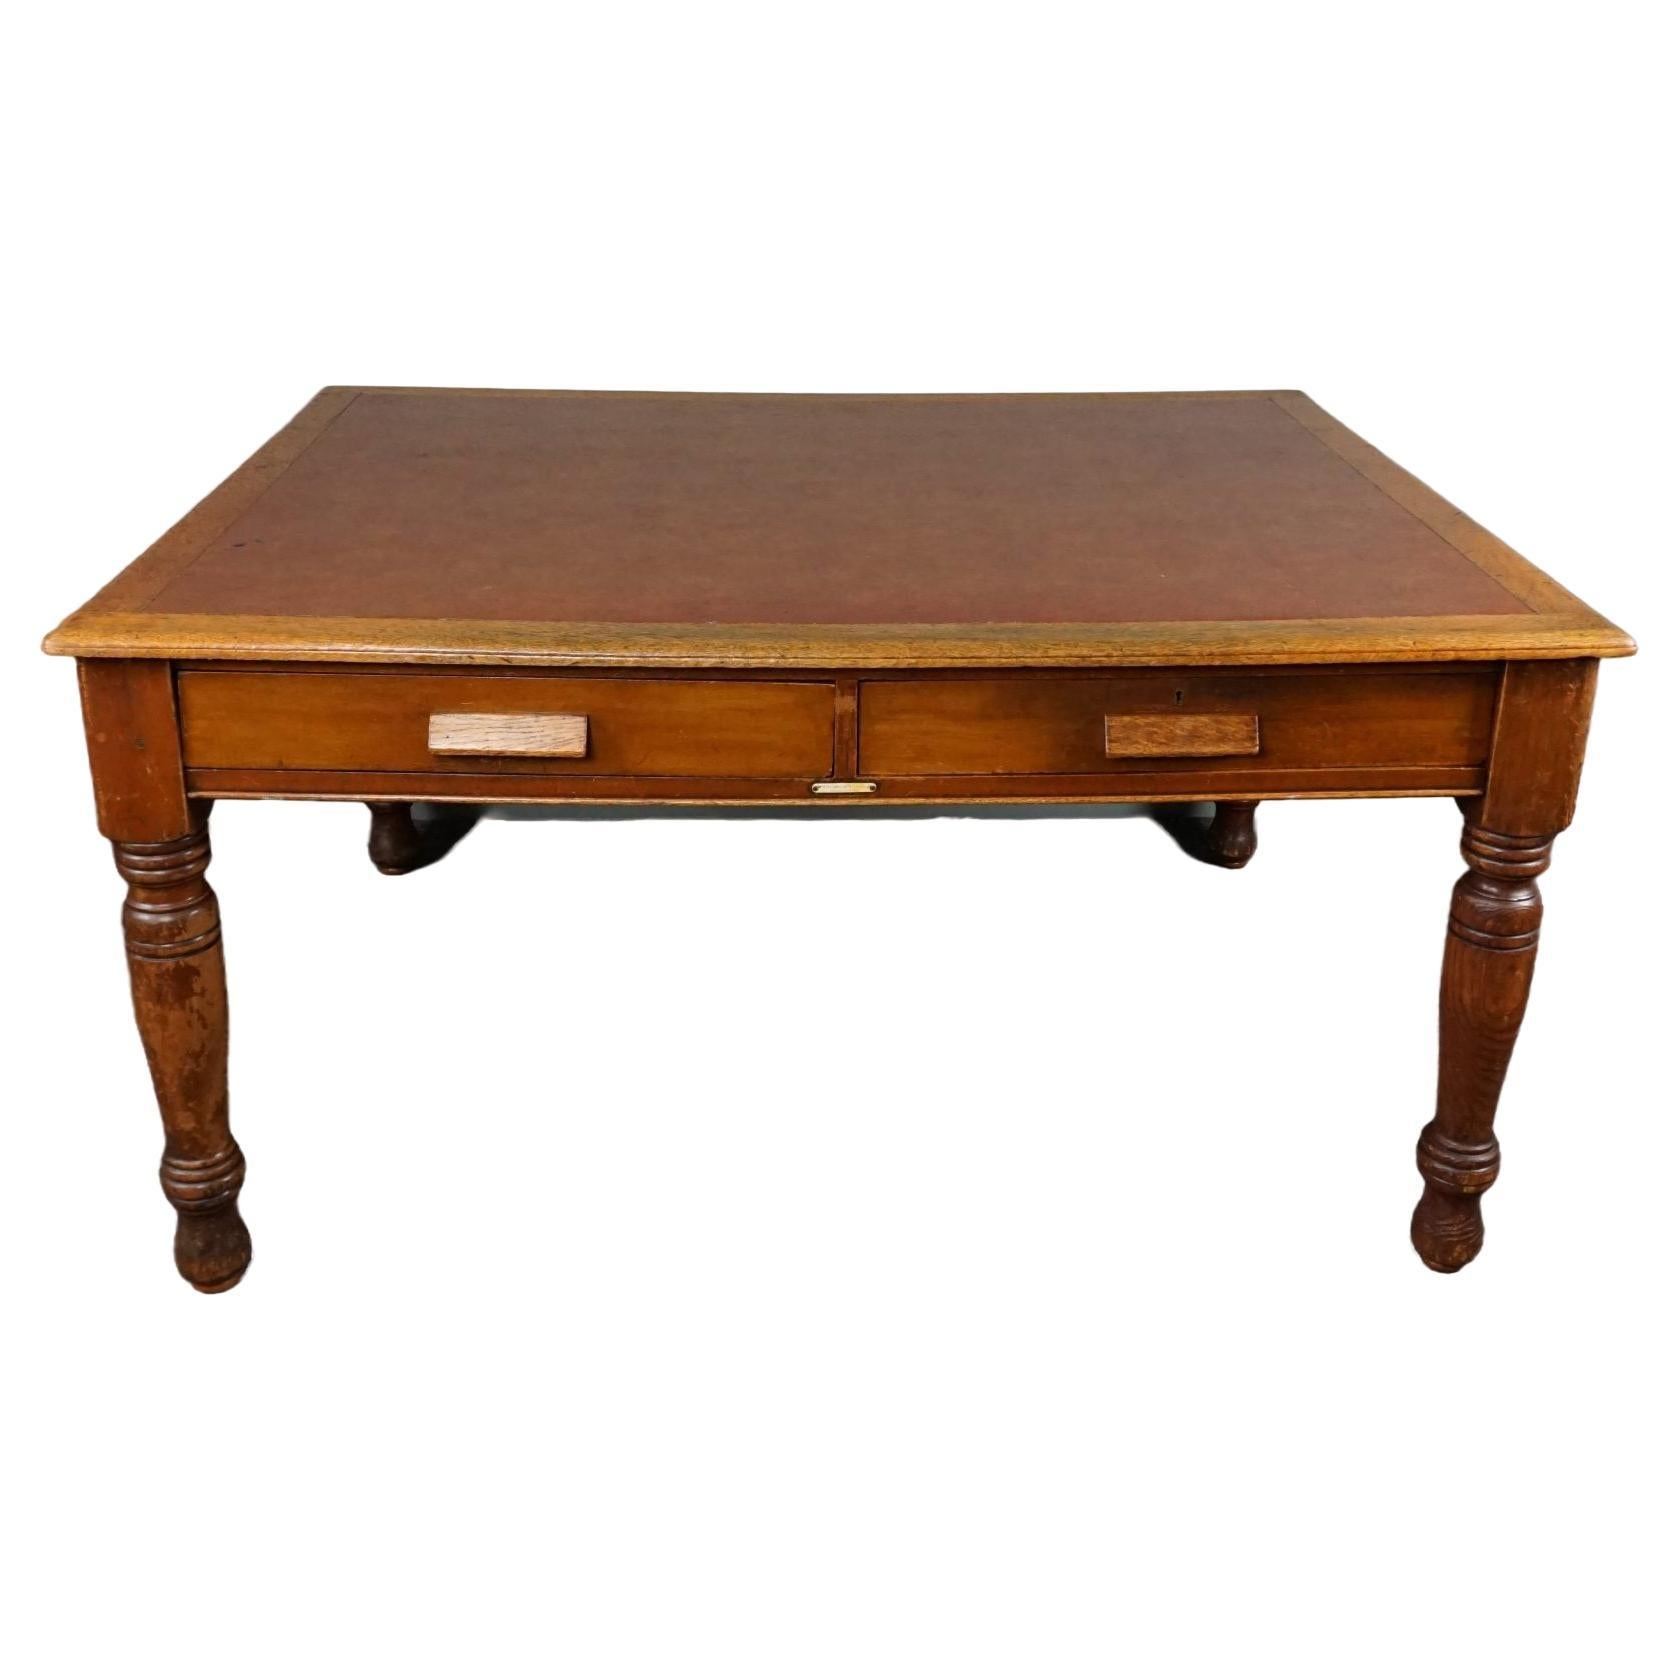 Generous antique English partner writing desk, Withy Grove Store, Manchester